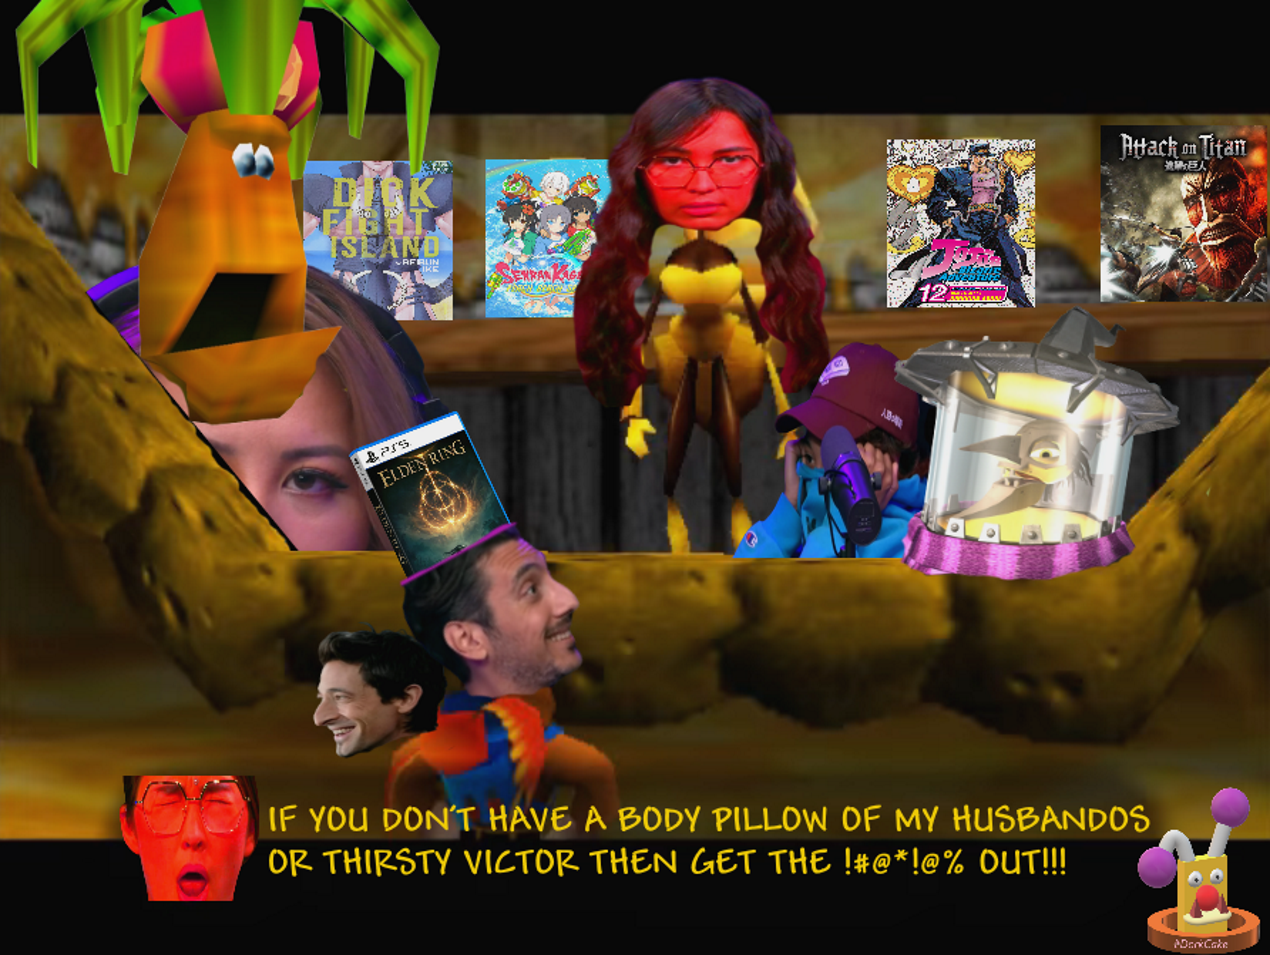 The Red Hornet Severs The Head To All That Opposes Her!.png